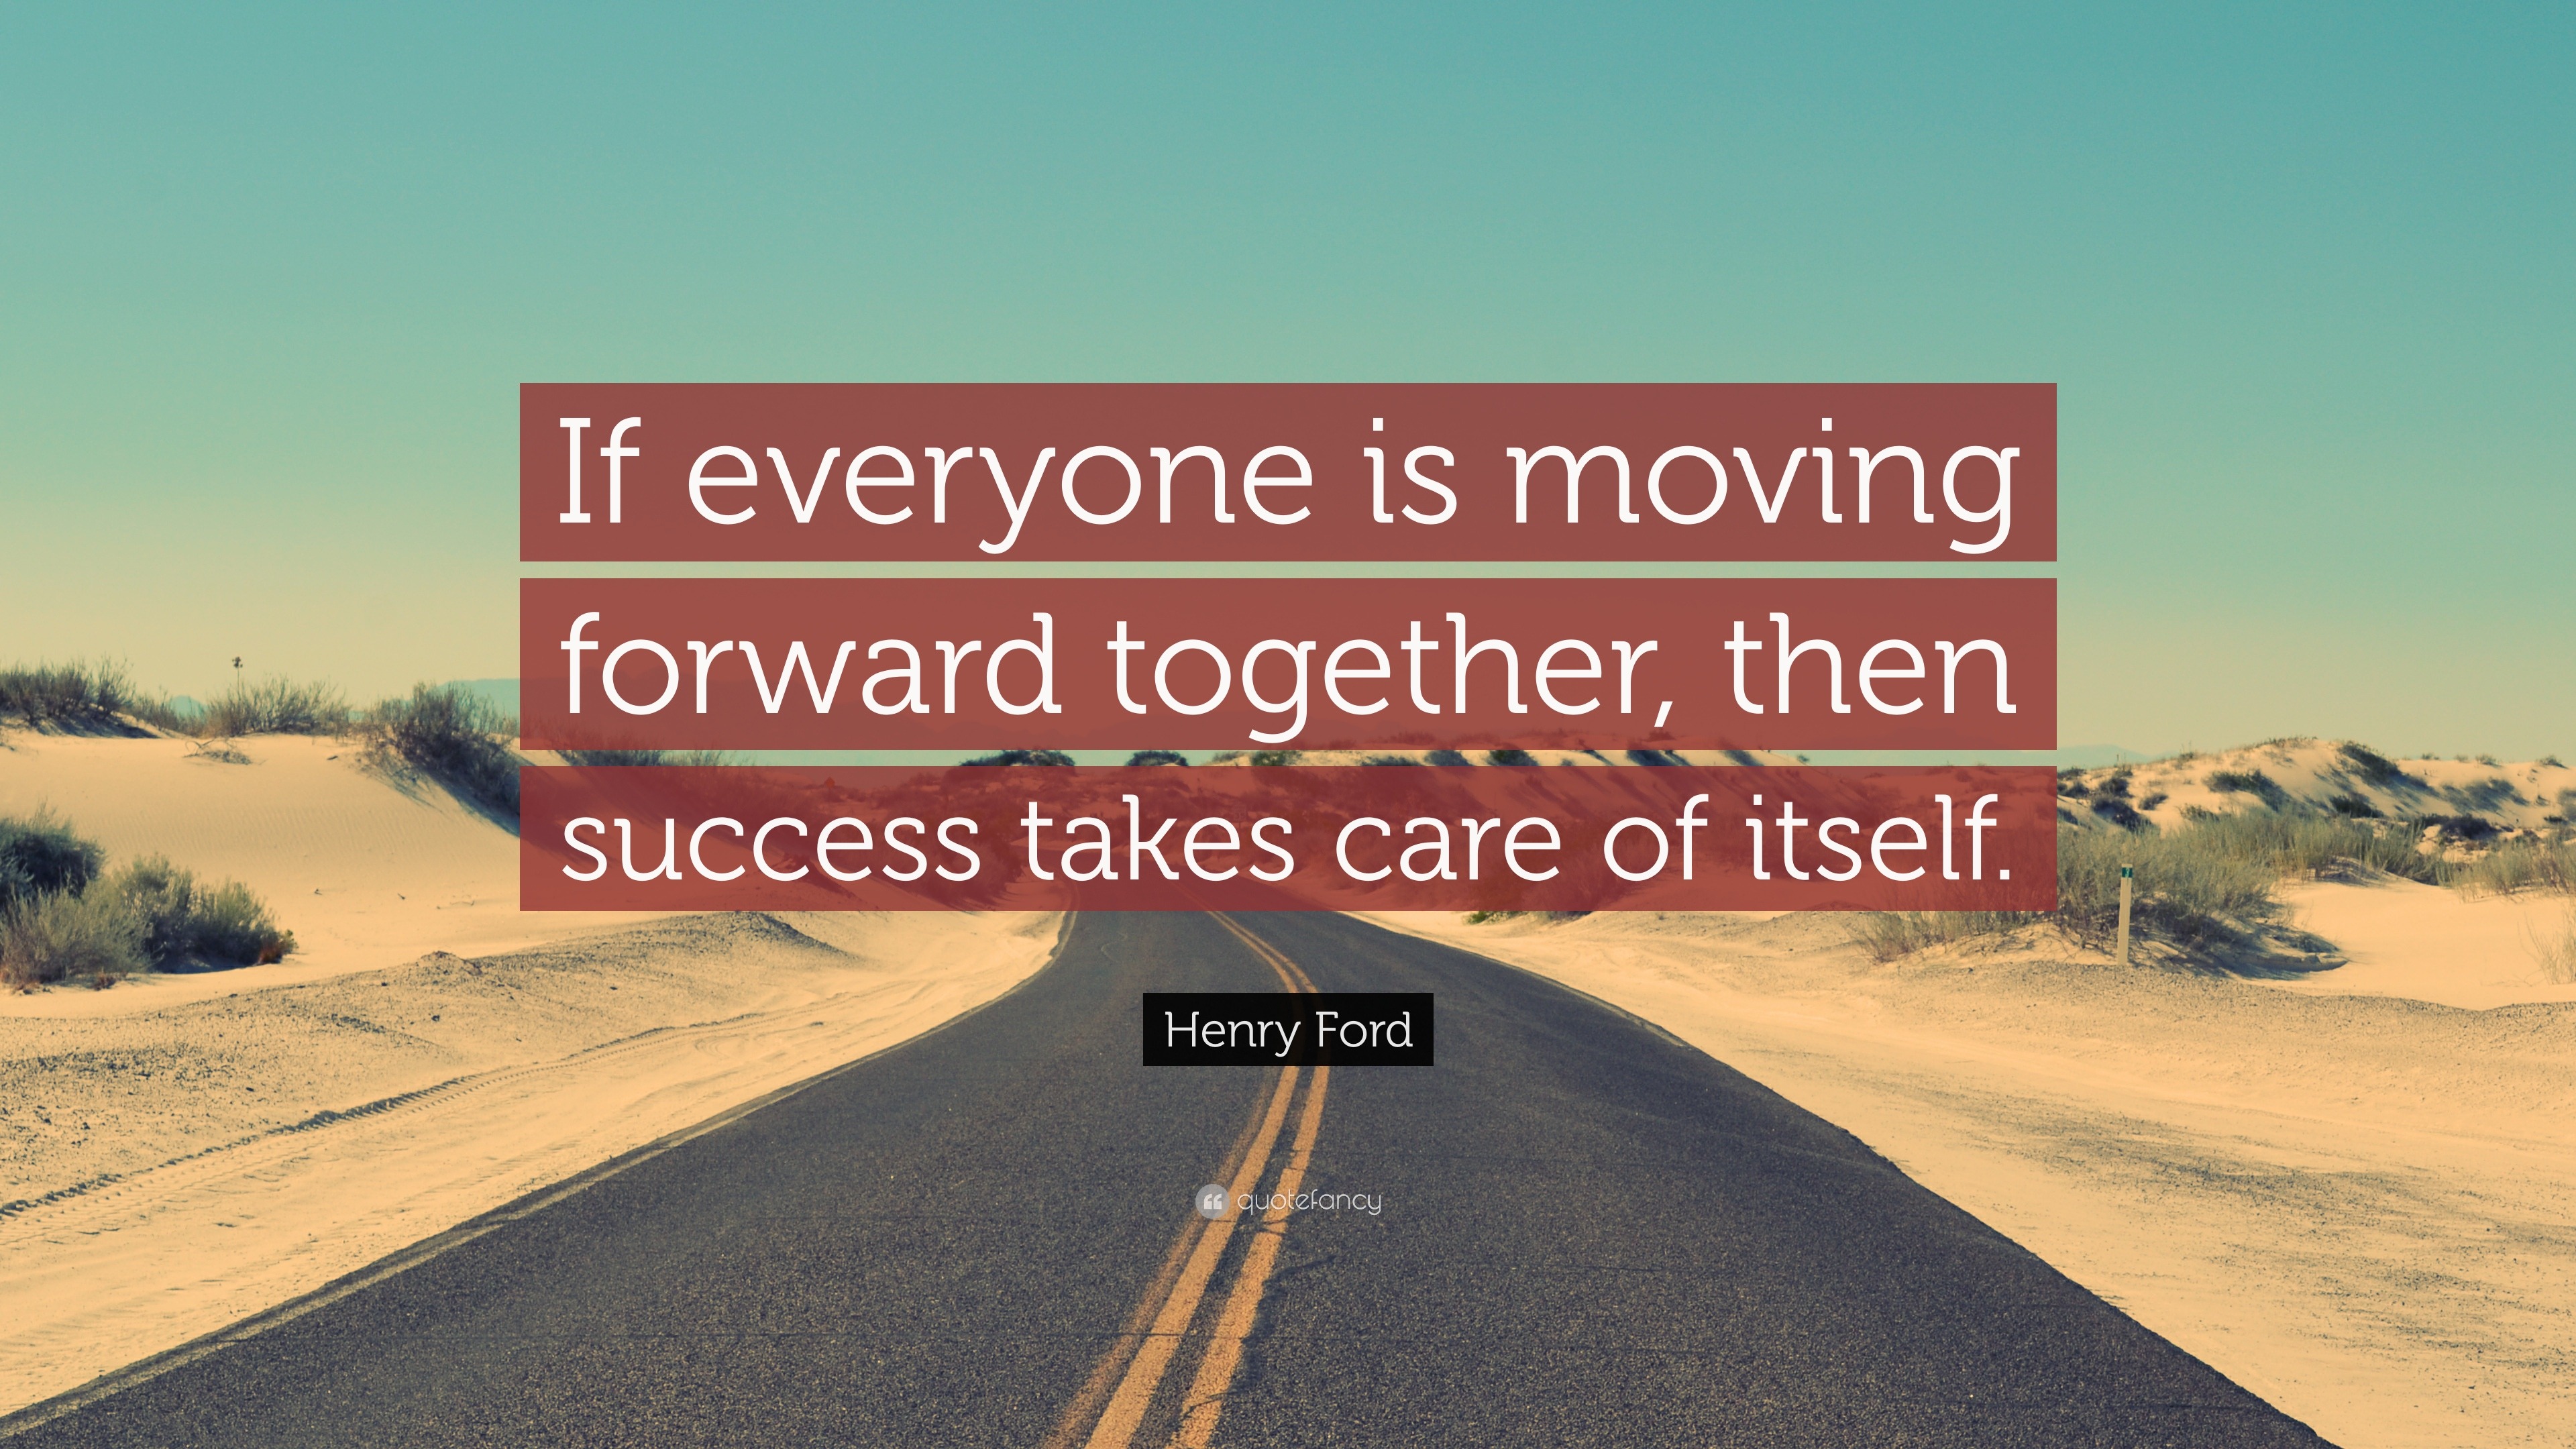 Henry Ford Quote If everyone is moving forward together then success 